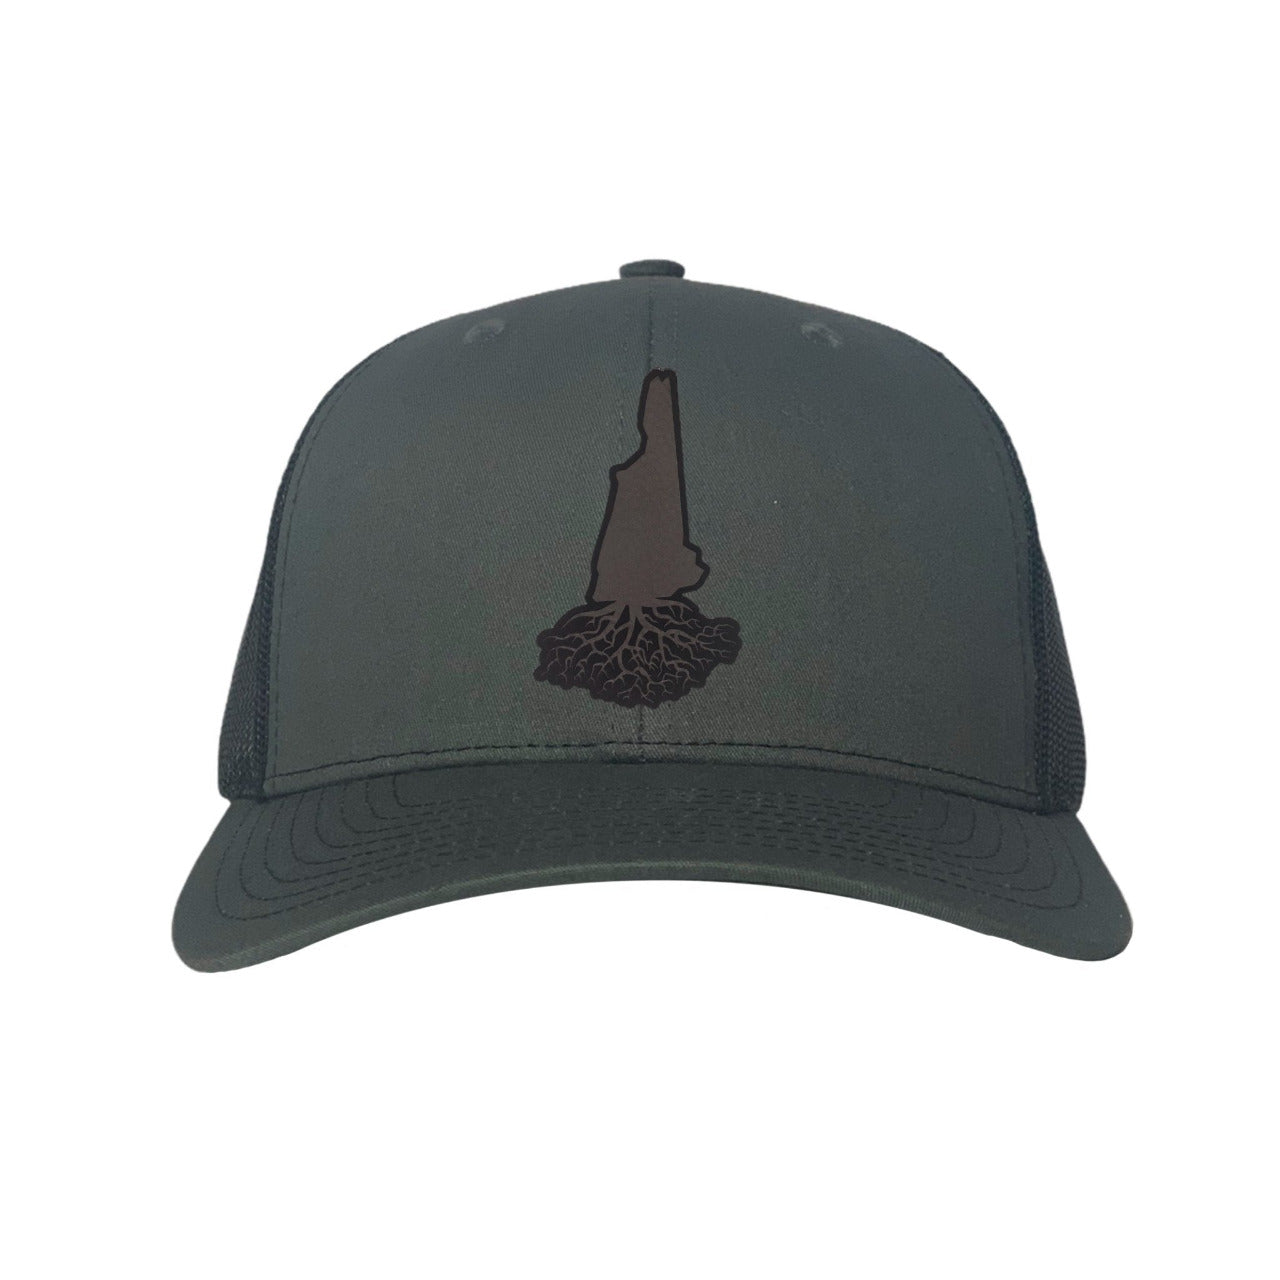 New Hampshire Roots Patch Trucker Hat - Hats